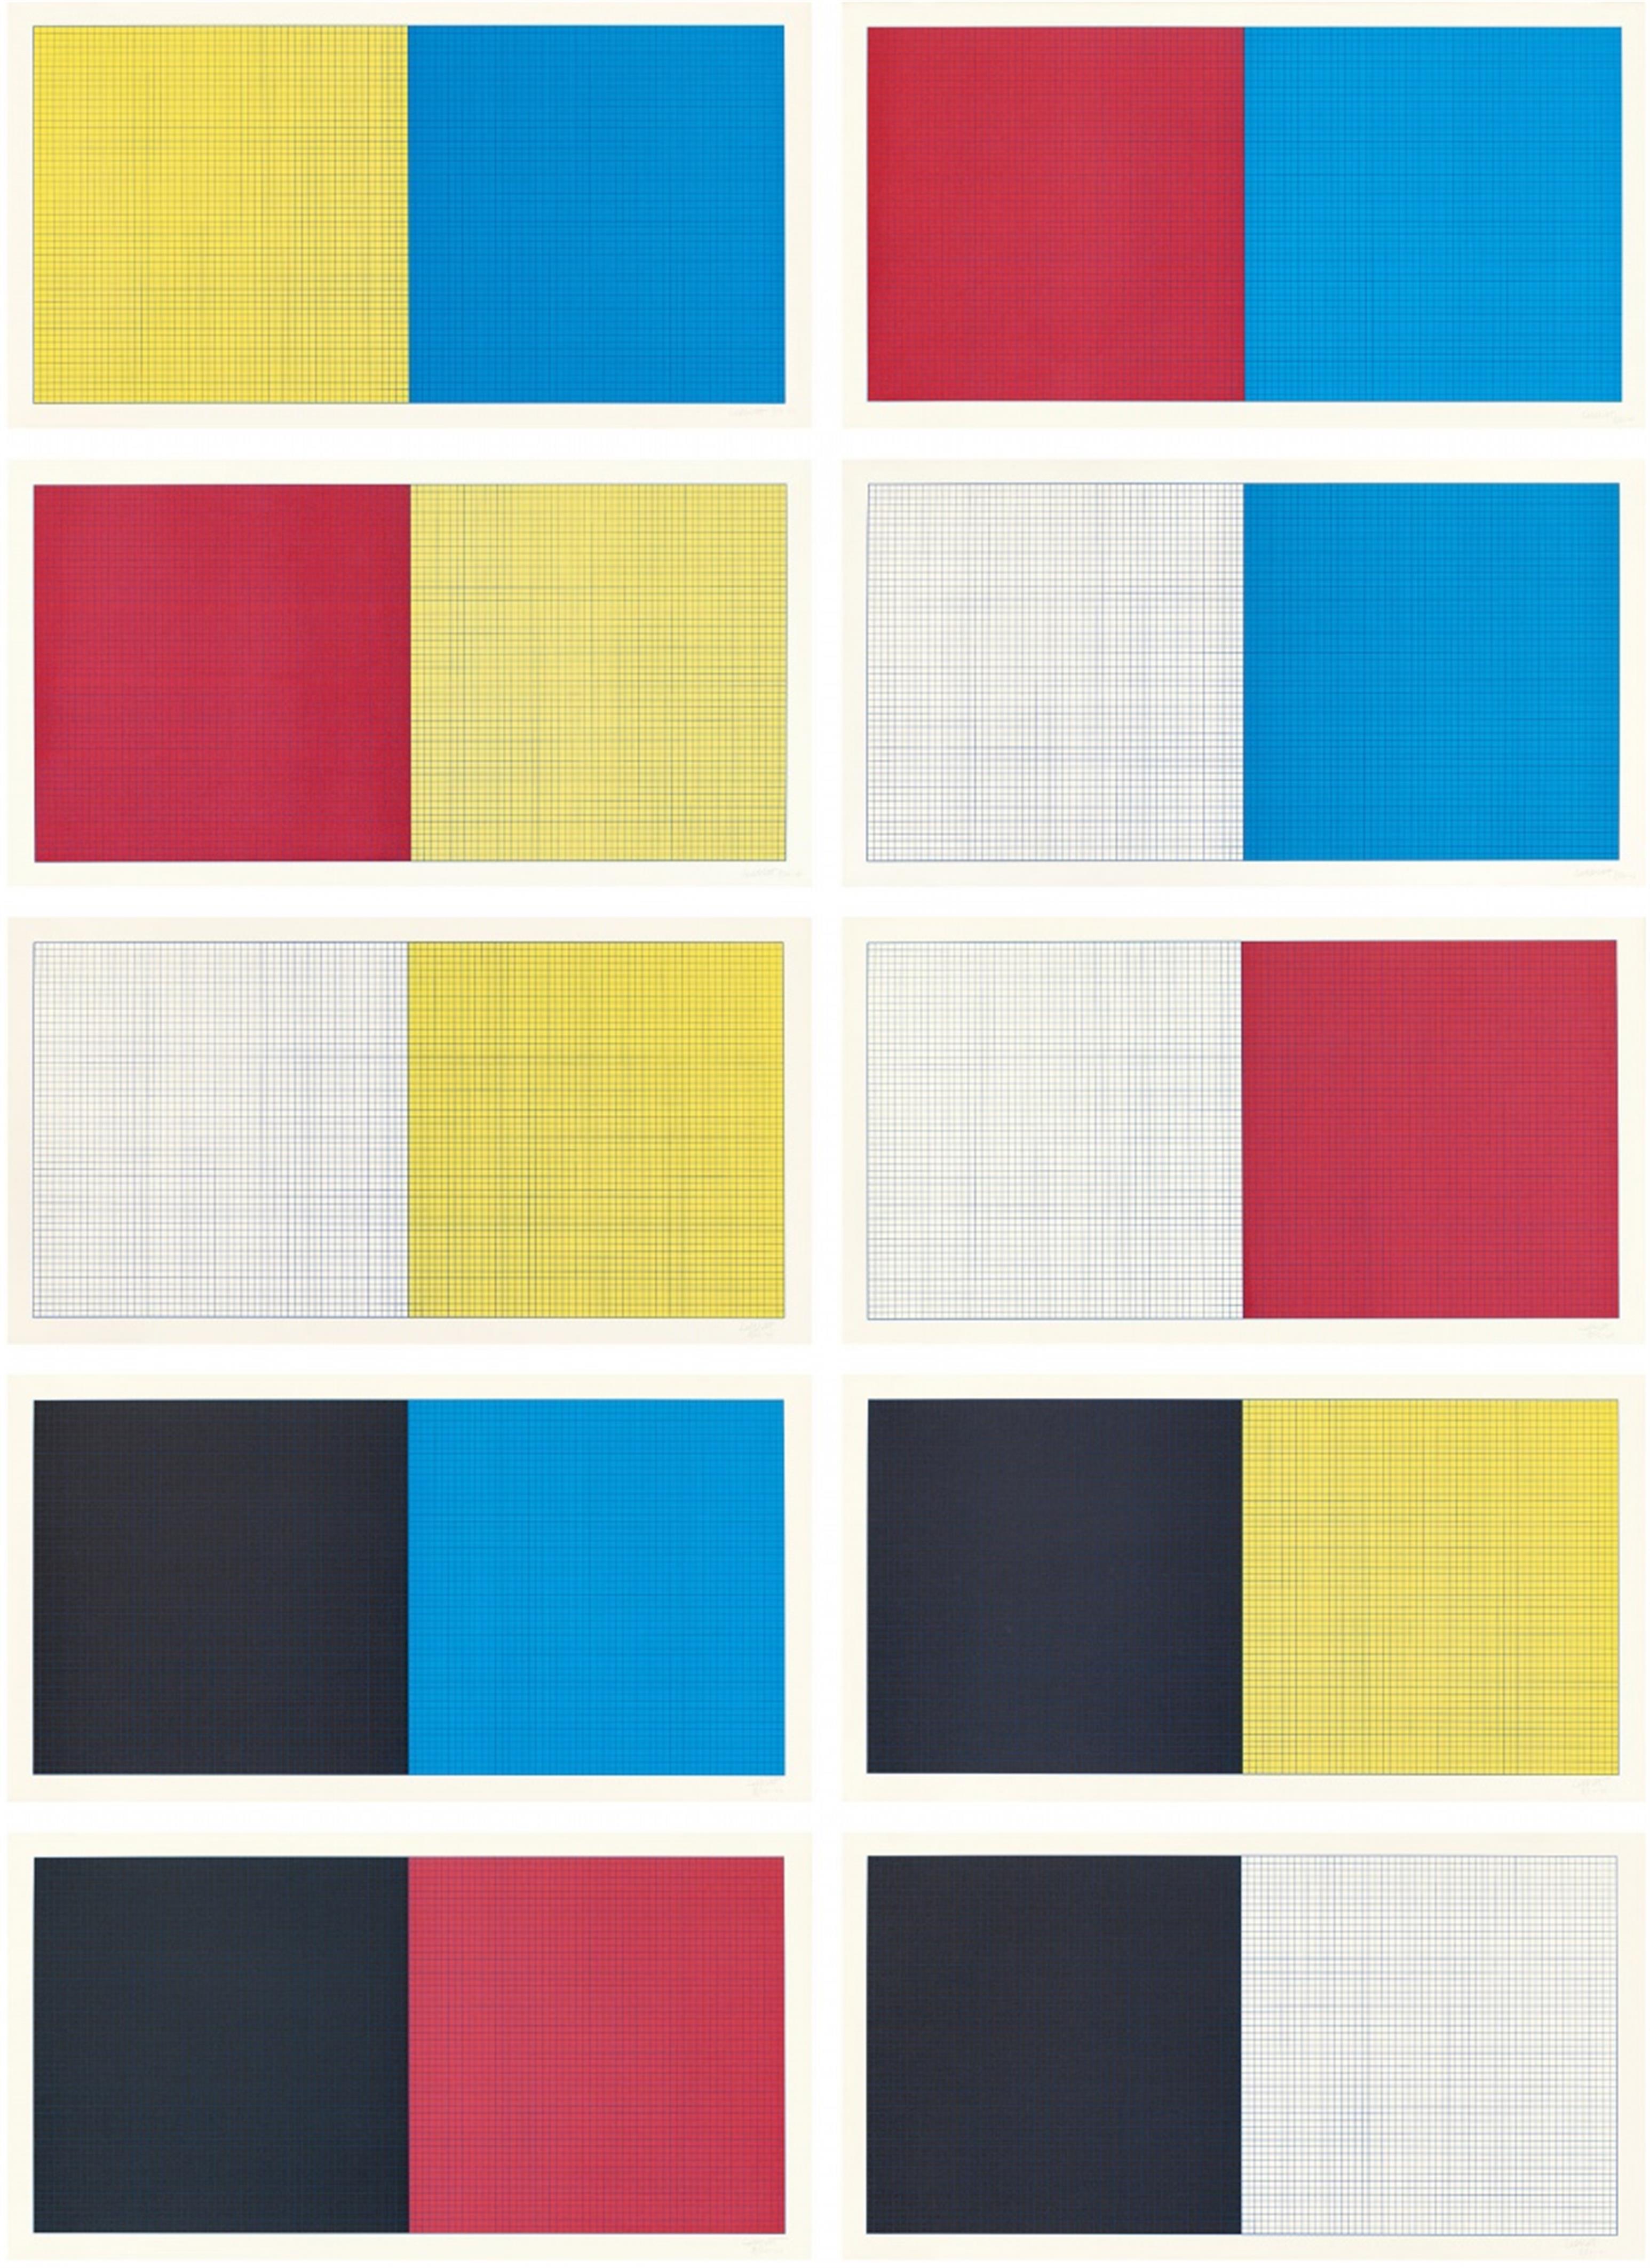 Sol LeWitt - Grids and Color - image-1